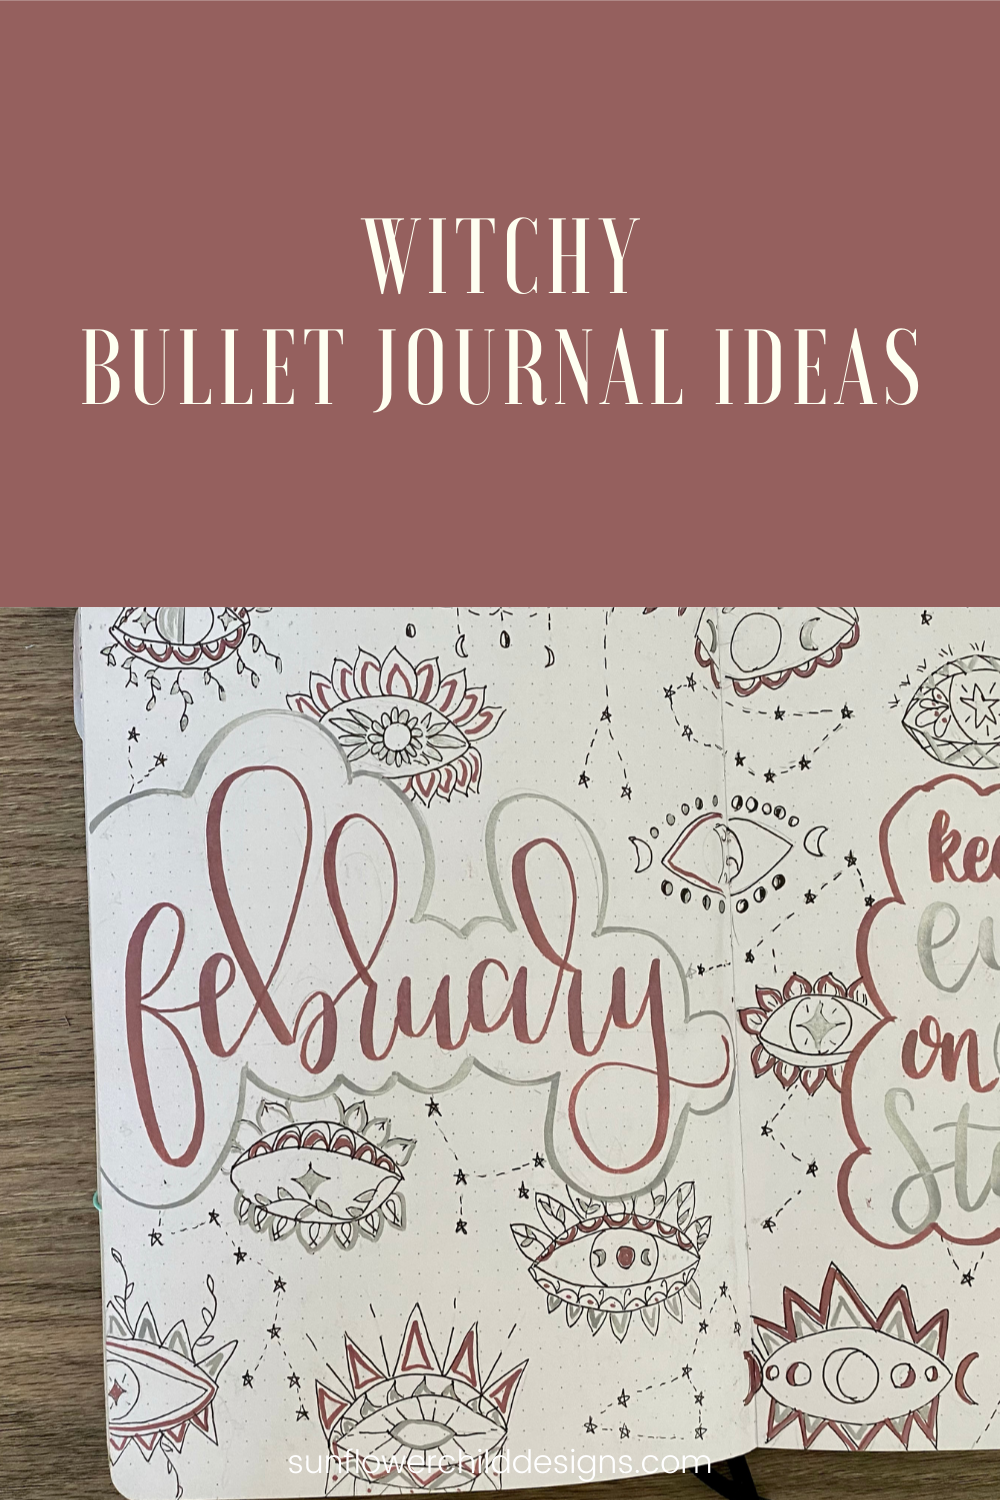 witchy-bullet-journal-ideas-february-bullet-journal-ideas 9.png